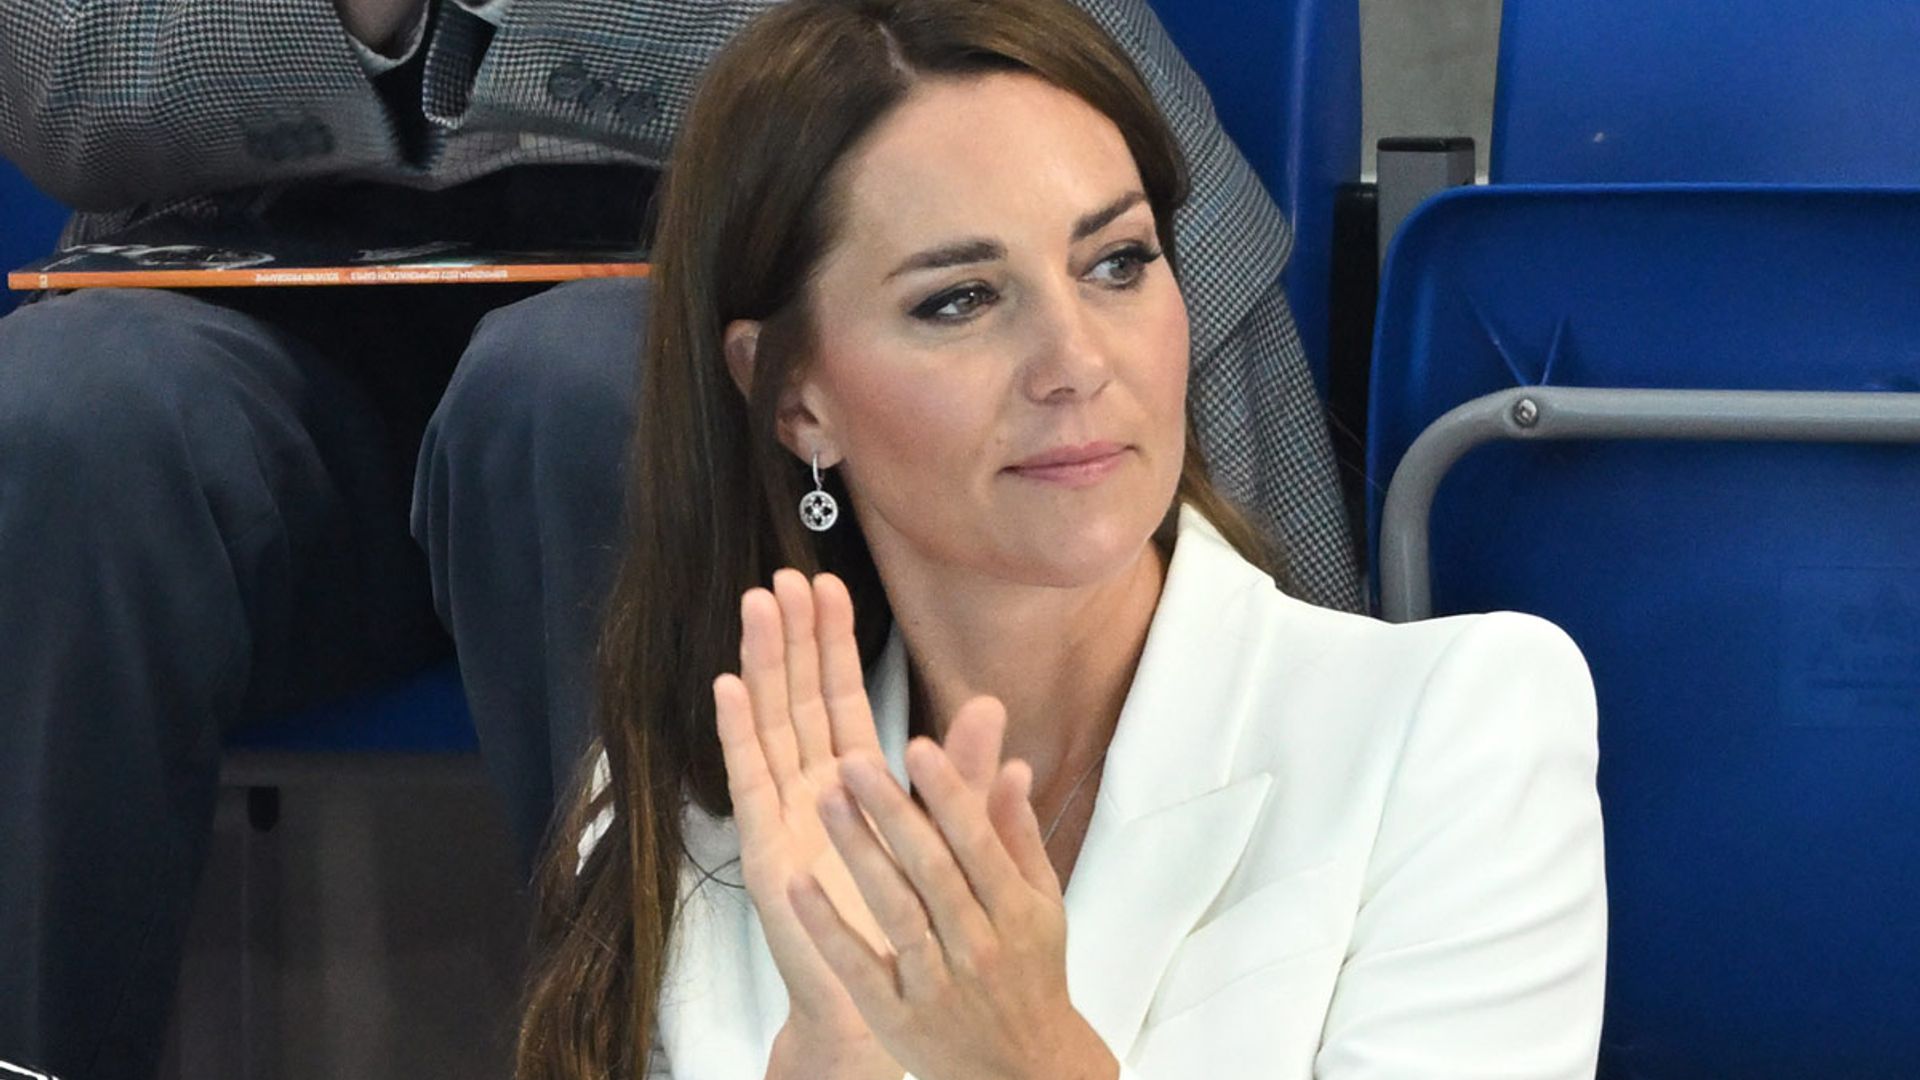 Buy a replica of Kate Middleton's engagement ring | The Independent | The  Independent